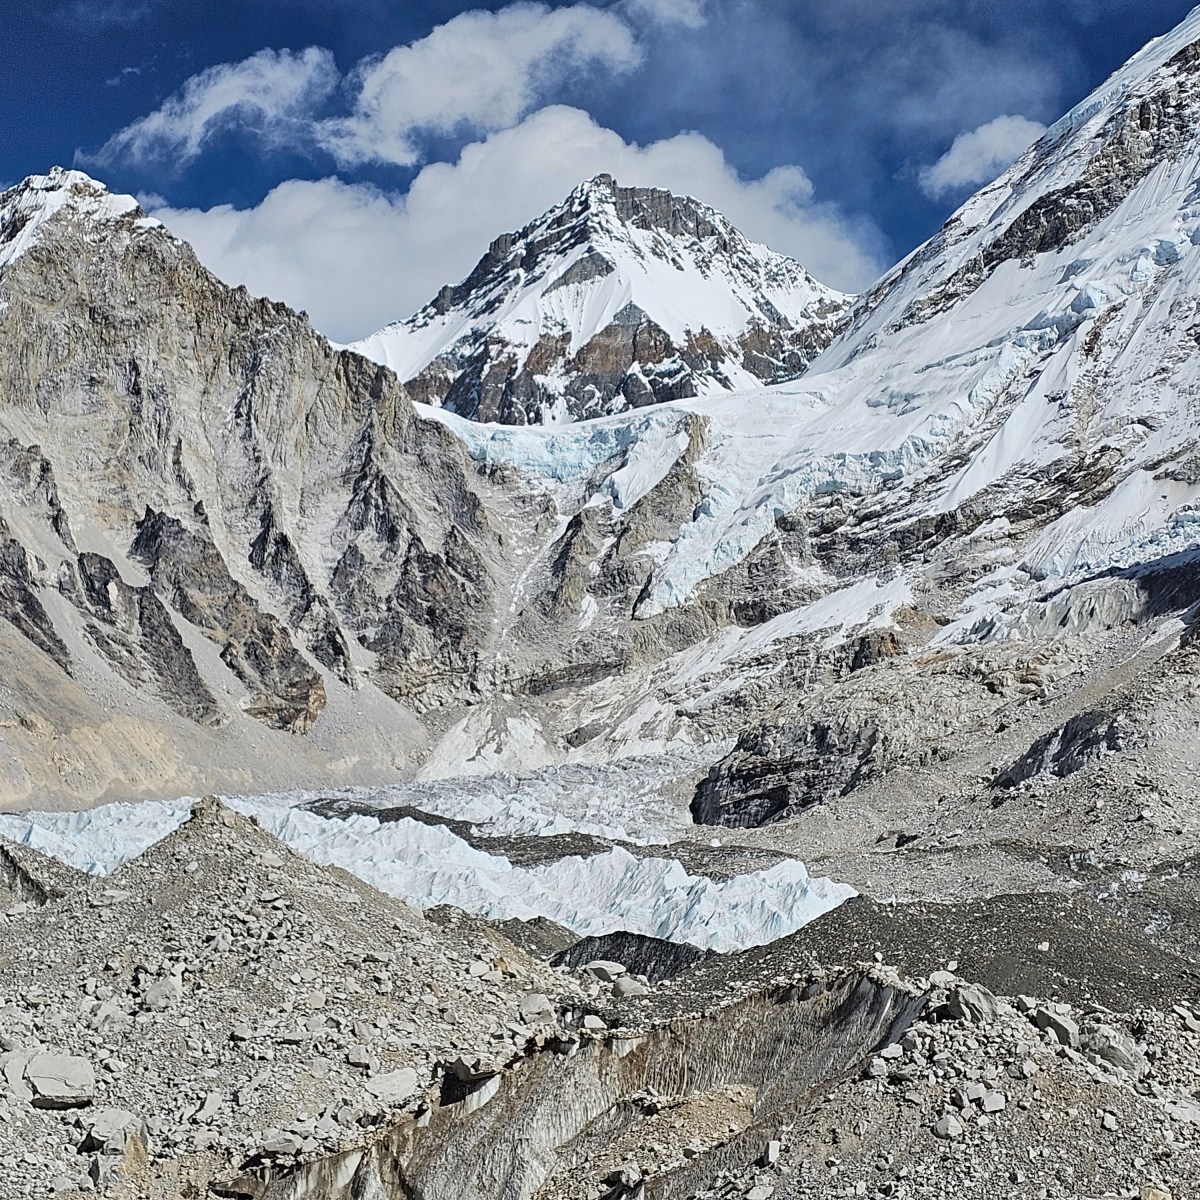 Everest Base Camp Trek – A Day by Day Account